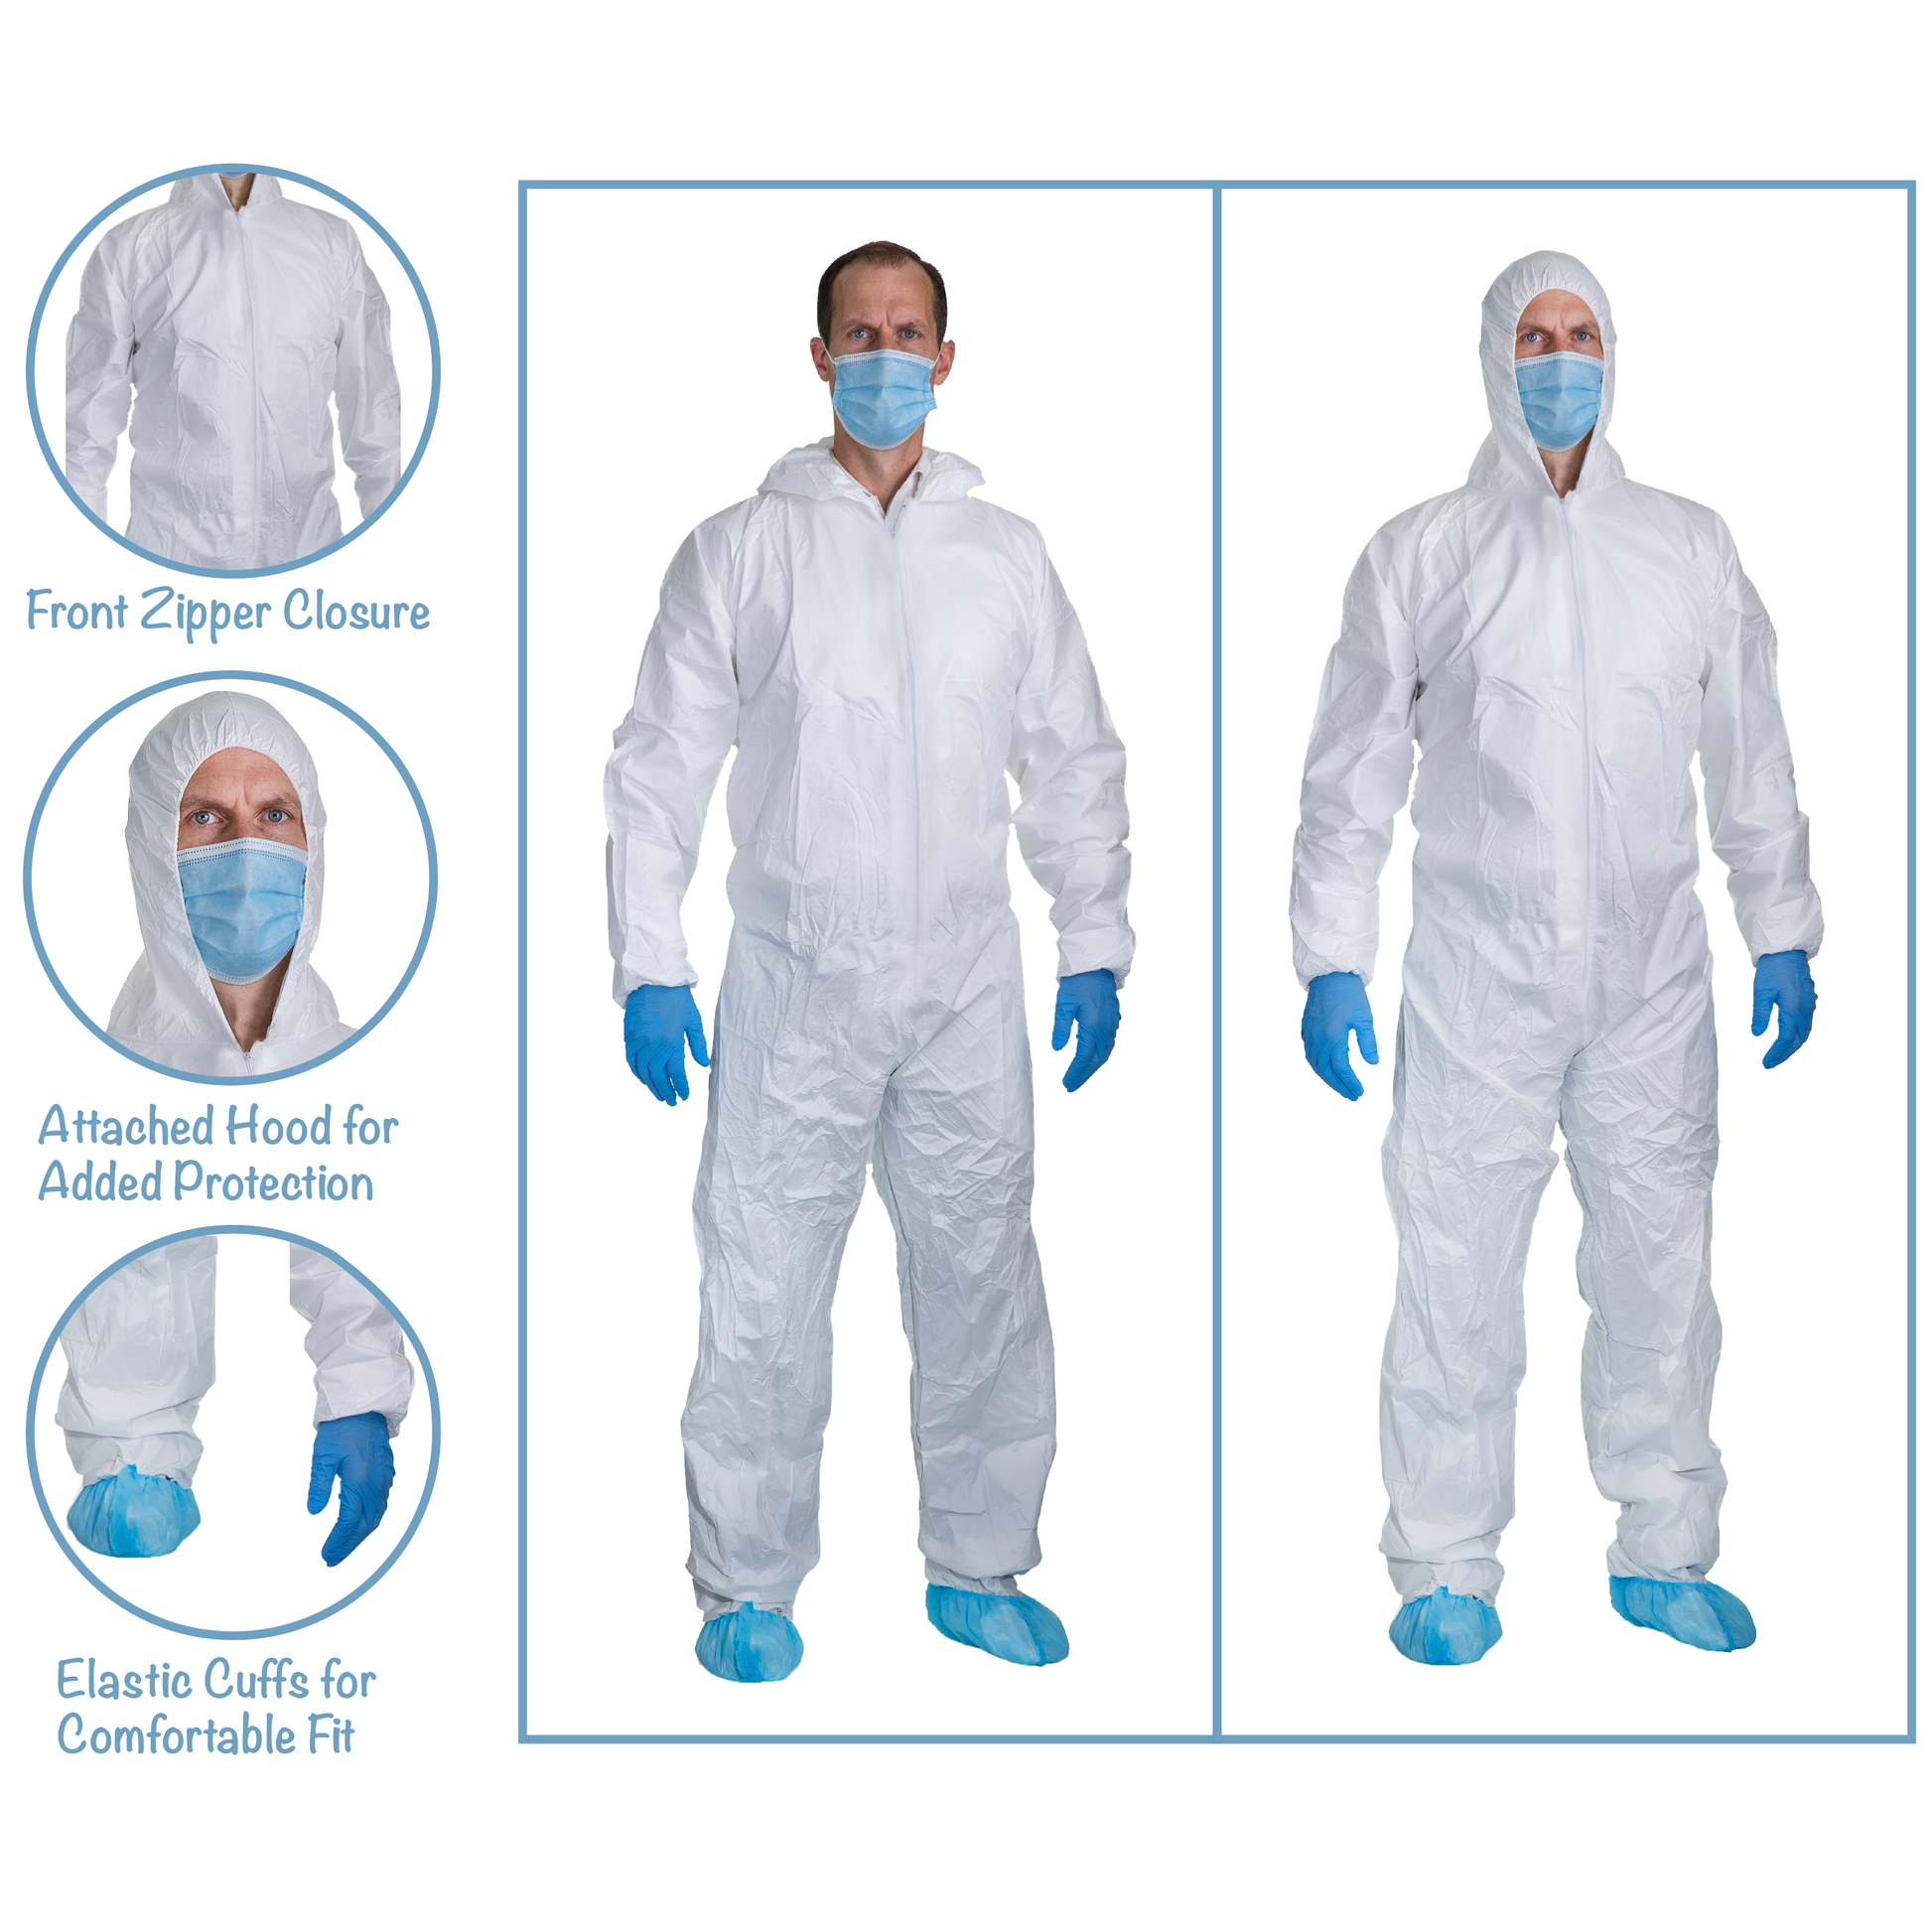 Microporous Disposable Coverall features